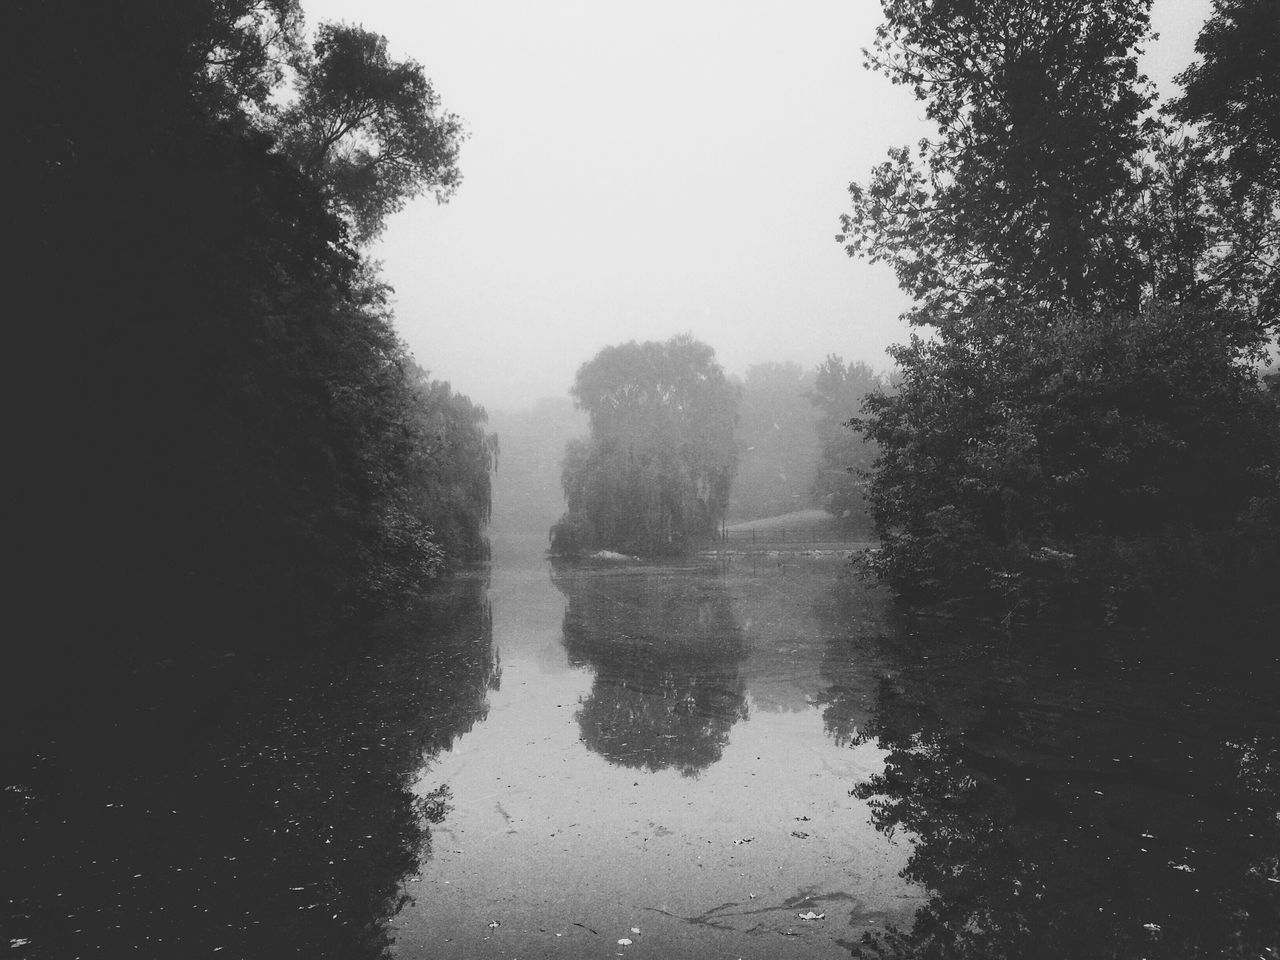 tree, water, reflection, tranquility, fog, tranquil scene, lake, scenics, beauty in nature, nature, foggy, waterfront, weather, sky, forest, standing water, growth, day, idyllic